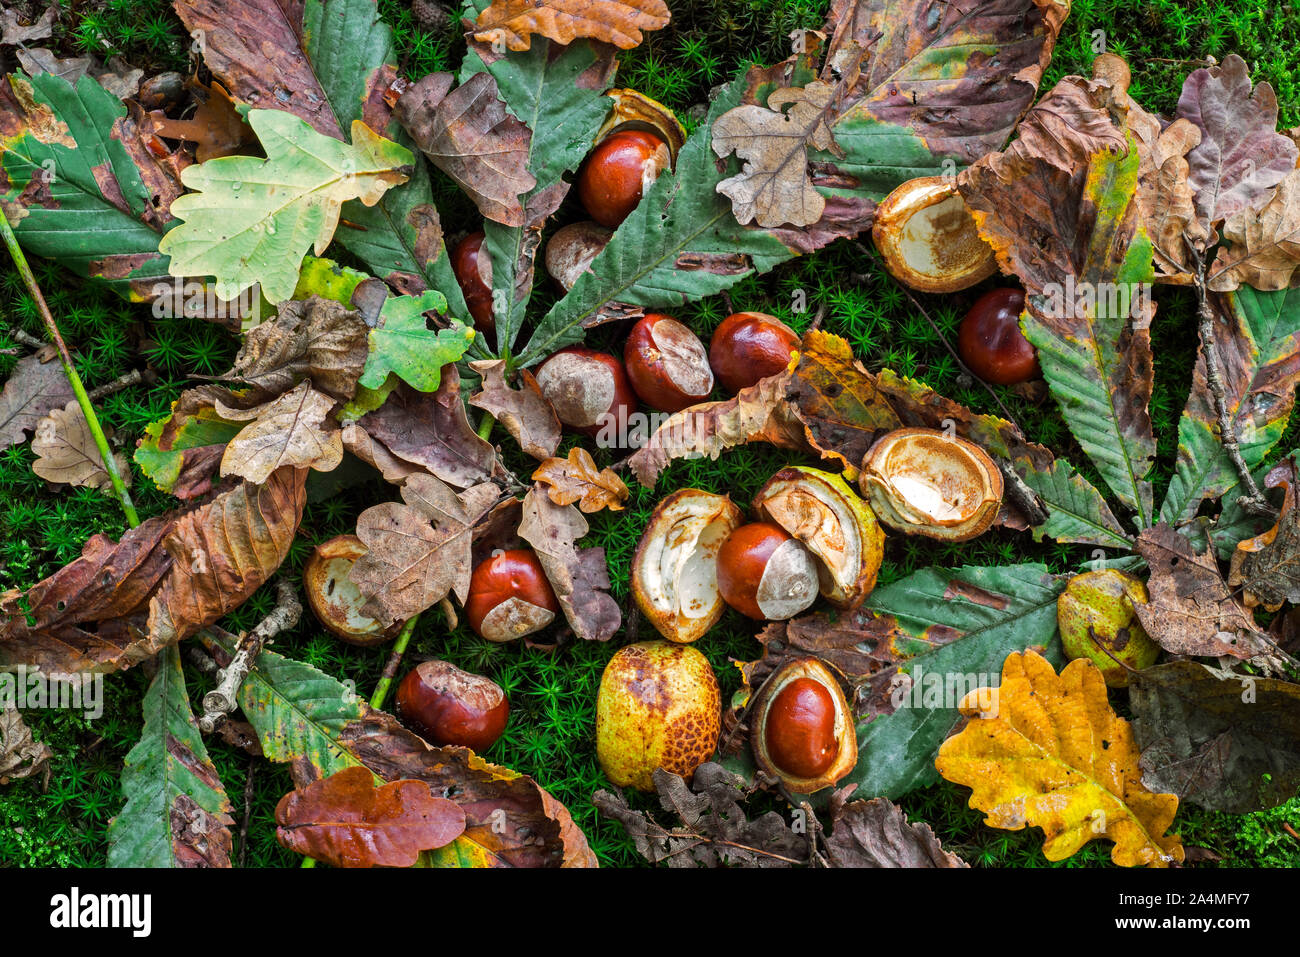 Fallen conkers / horse-chestnuts and leaves from the horse-chestnut tree / conker tree (Aesculus hippocastanum) on the forest floor in autumn woodland Stock Photo